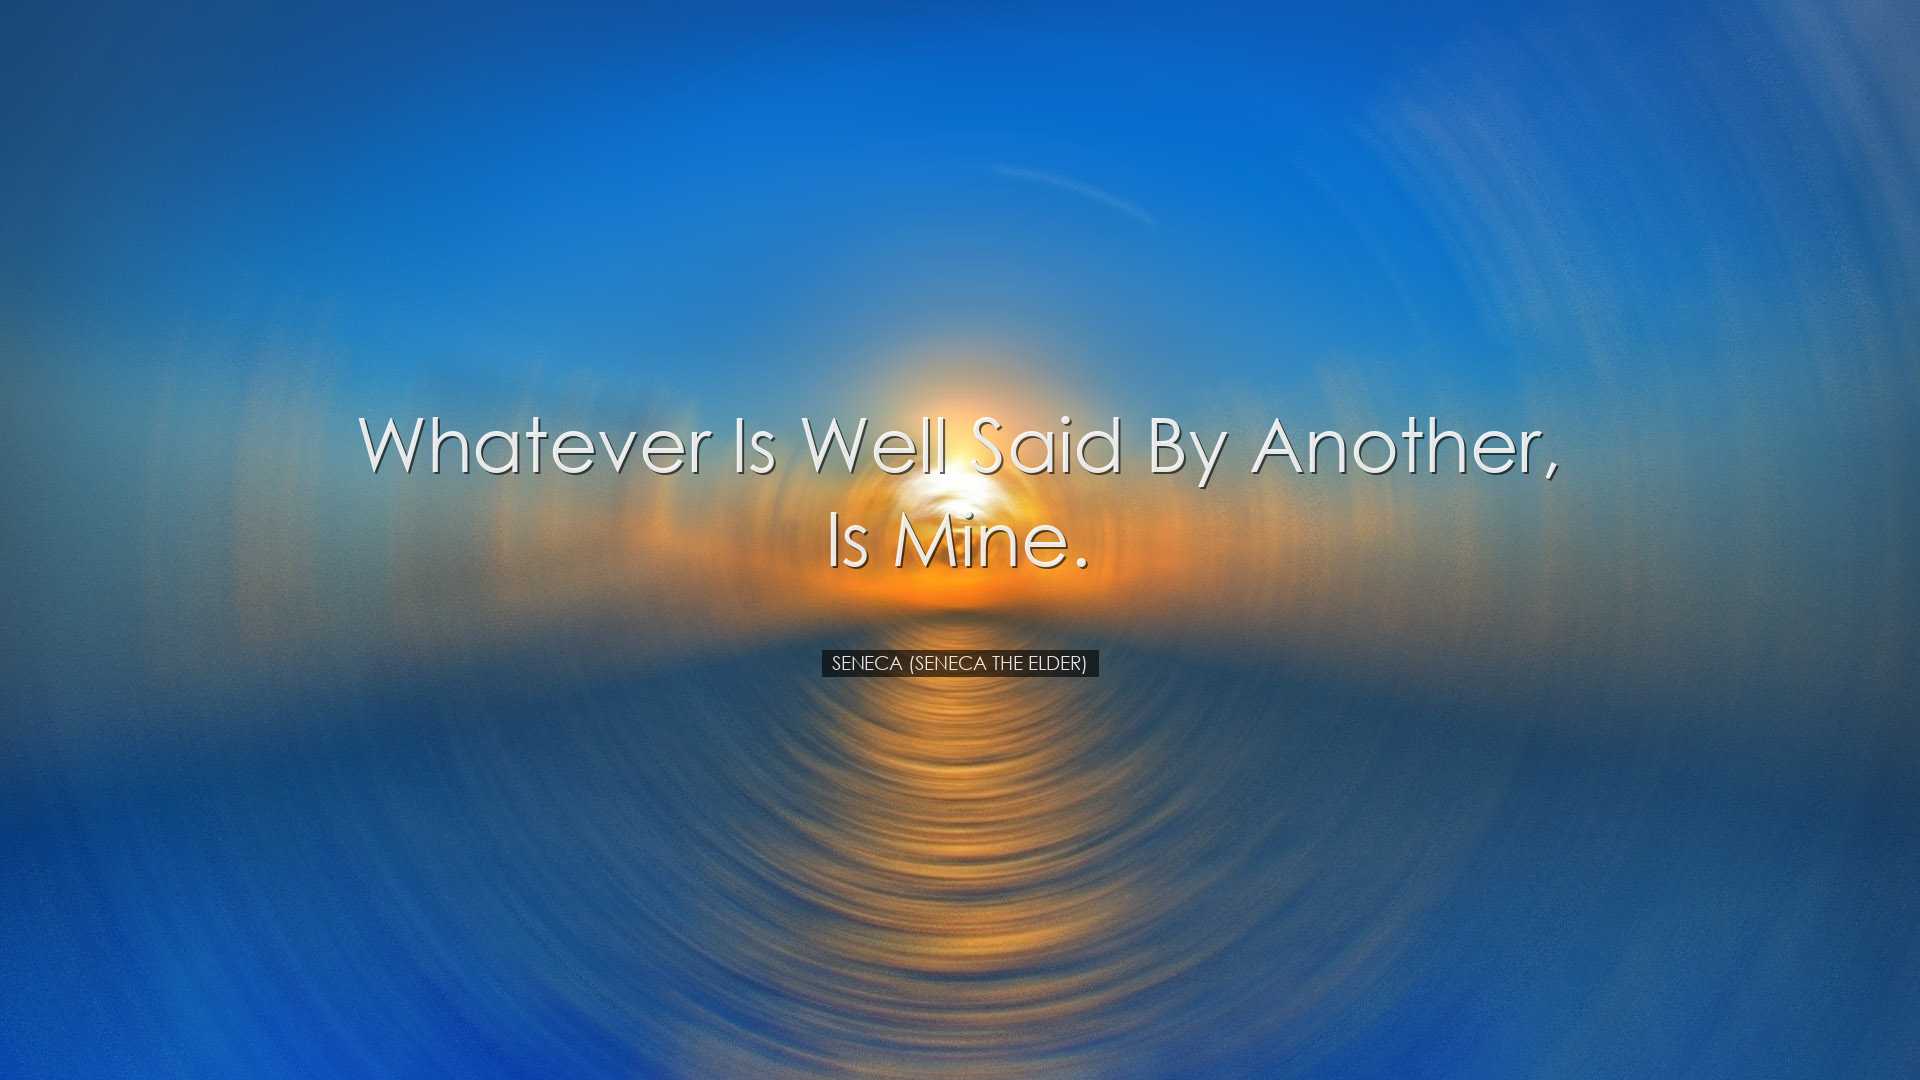 Whatever is well said by another, is mine. - Seneca (Seneca the El